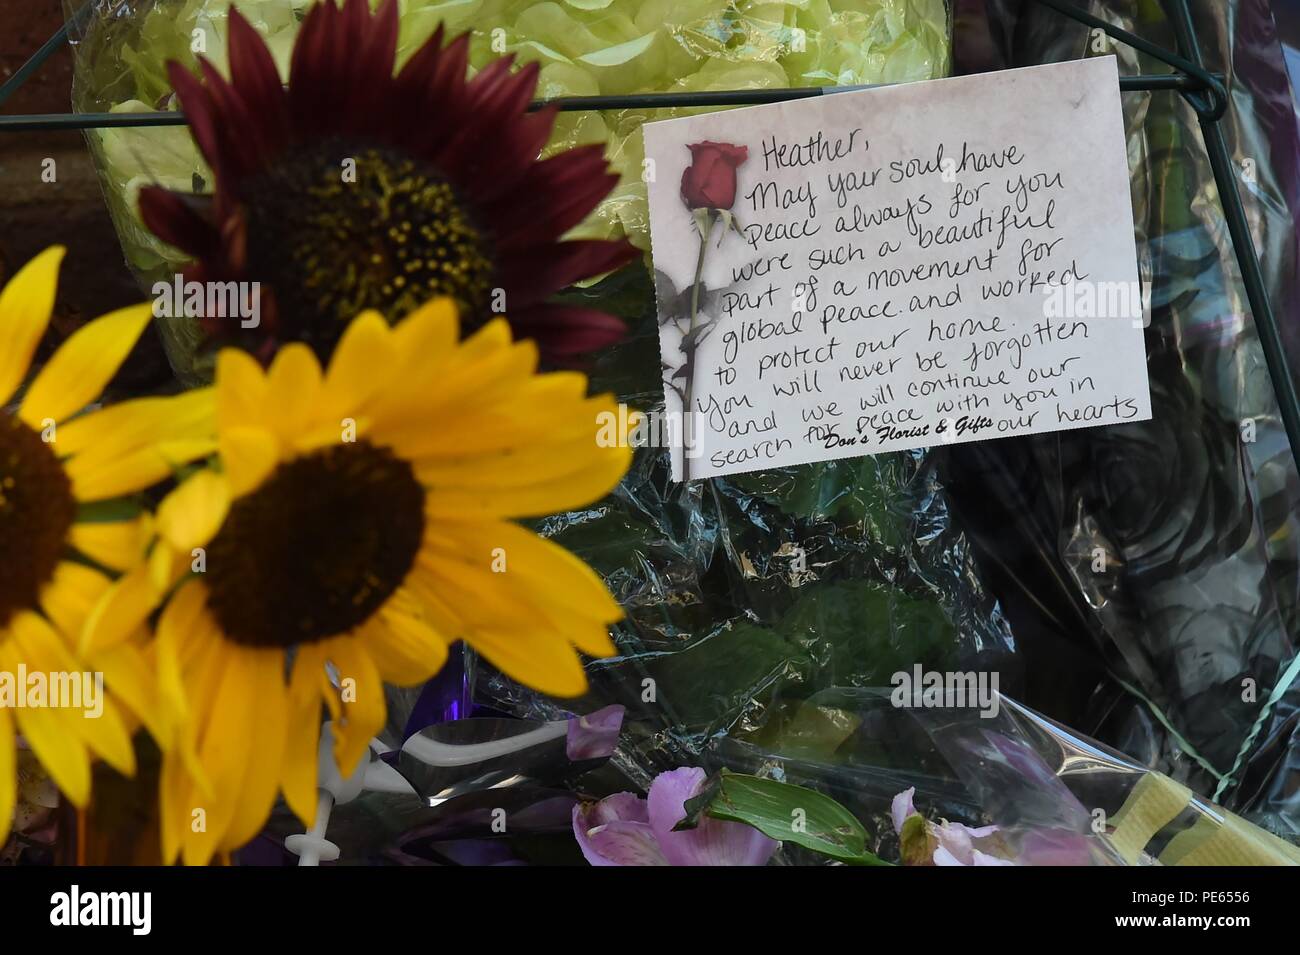 (180812) -- WASHINGTON, Aug. 12, 2018 (Xinhua) -- A condolent message is seen at the street corner where Heather Heyer was killed in Charlottesville, Virginia, the United States, on Aug. 10, 2018. A year after a white nationalist rally traumatized Charlottesville, in the U.S. state of Virginia, with riots and blood, the city is still healing from the shock. On Aug. 12, 2017, white supremacists and members of other hate groups gathered in Charlottesville for a self-styled 'Unite the Right' rally to protest against the city's decision to remove a Confederate statue before clashing violently with Stock Photo